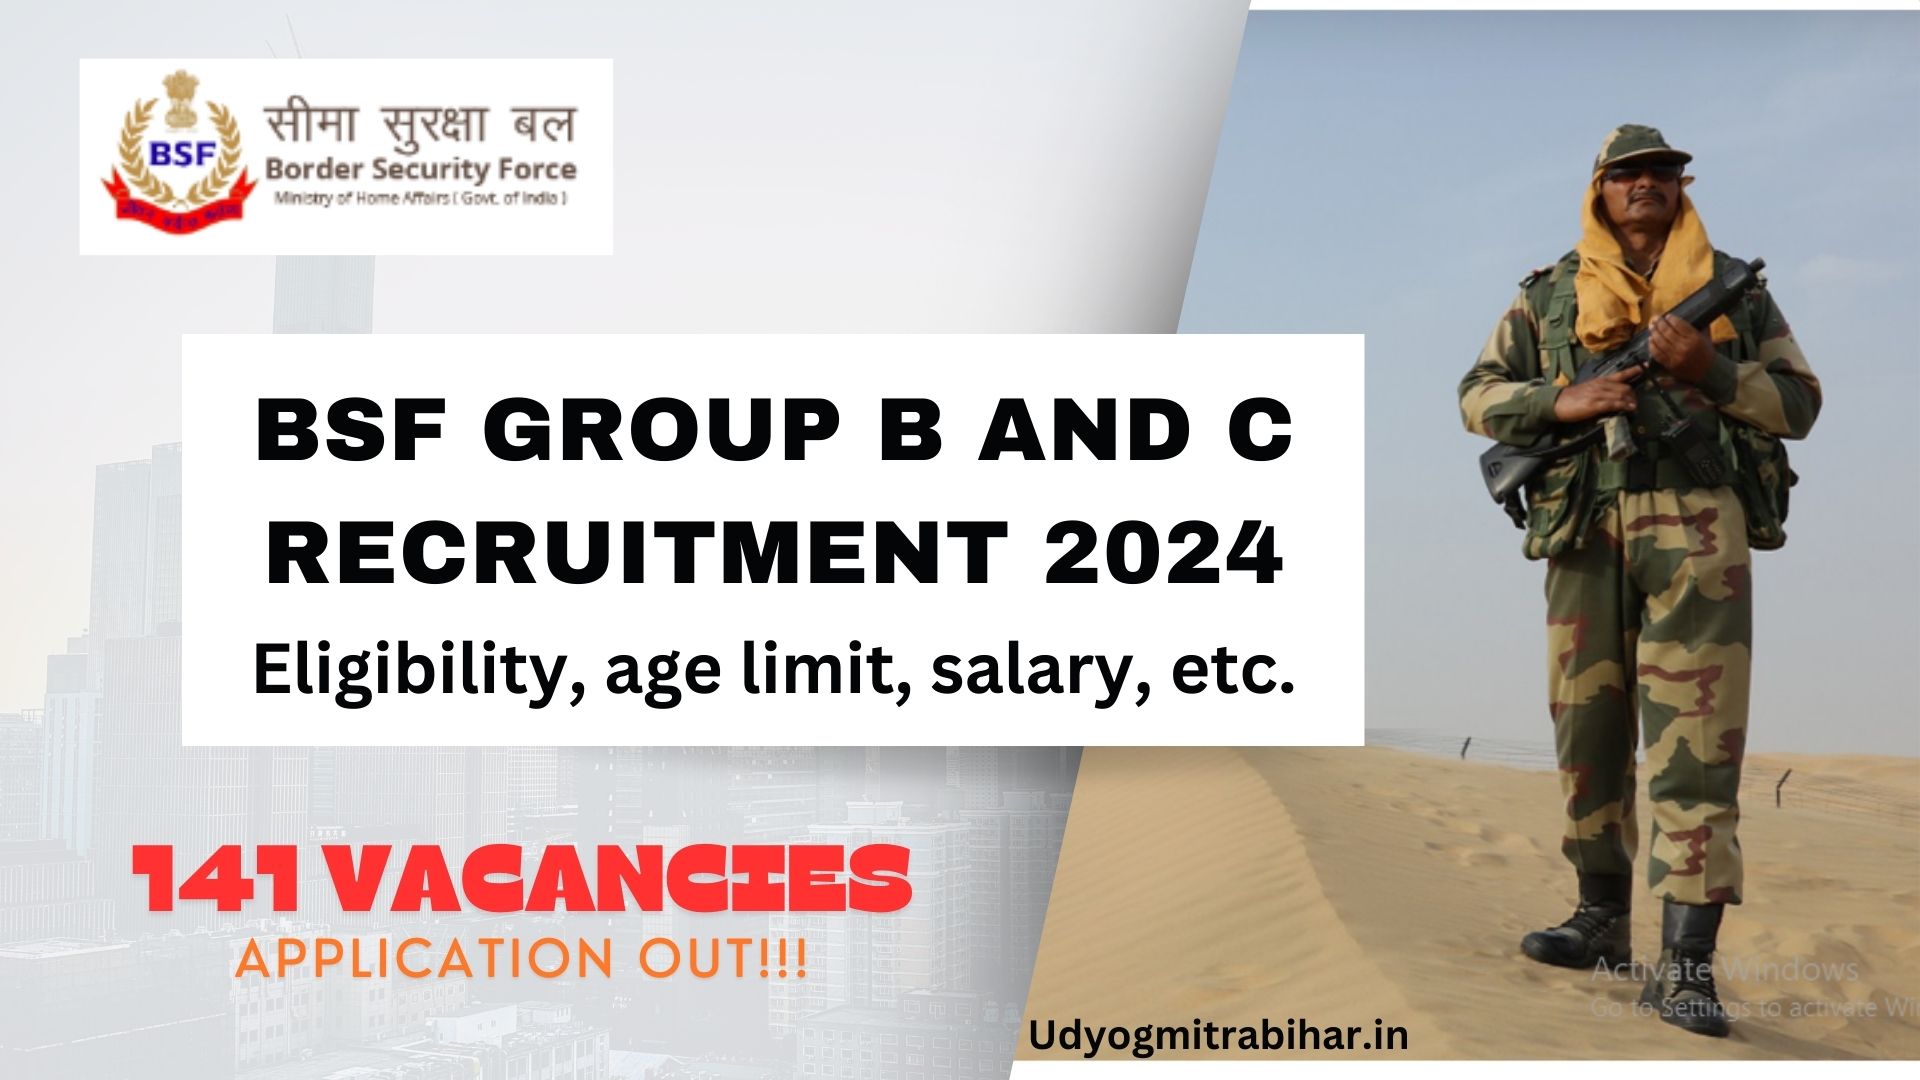 BSF Group B and C Recruitment for 141 Vacant Positions, Apply Now, Eligibility Criteria, Salary